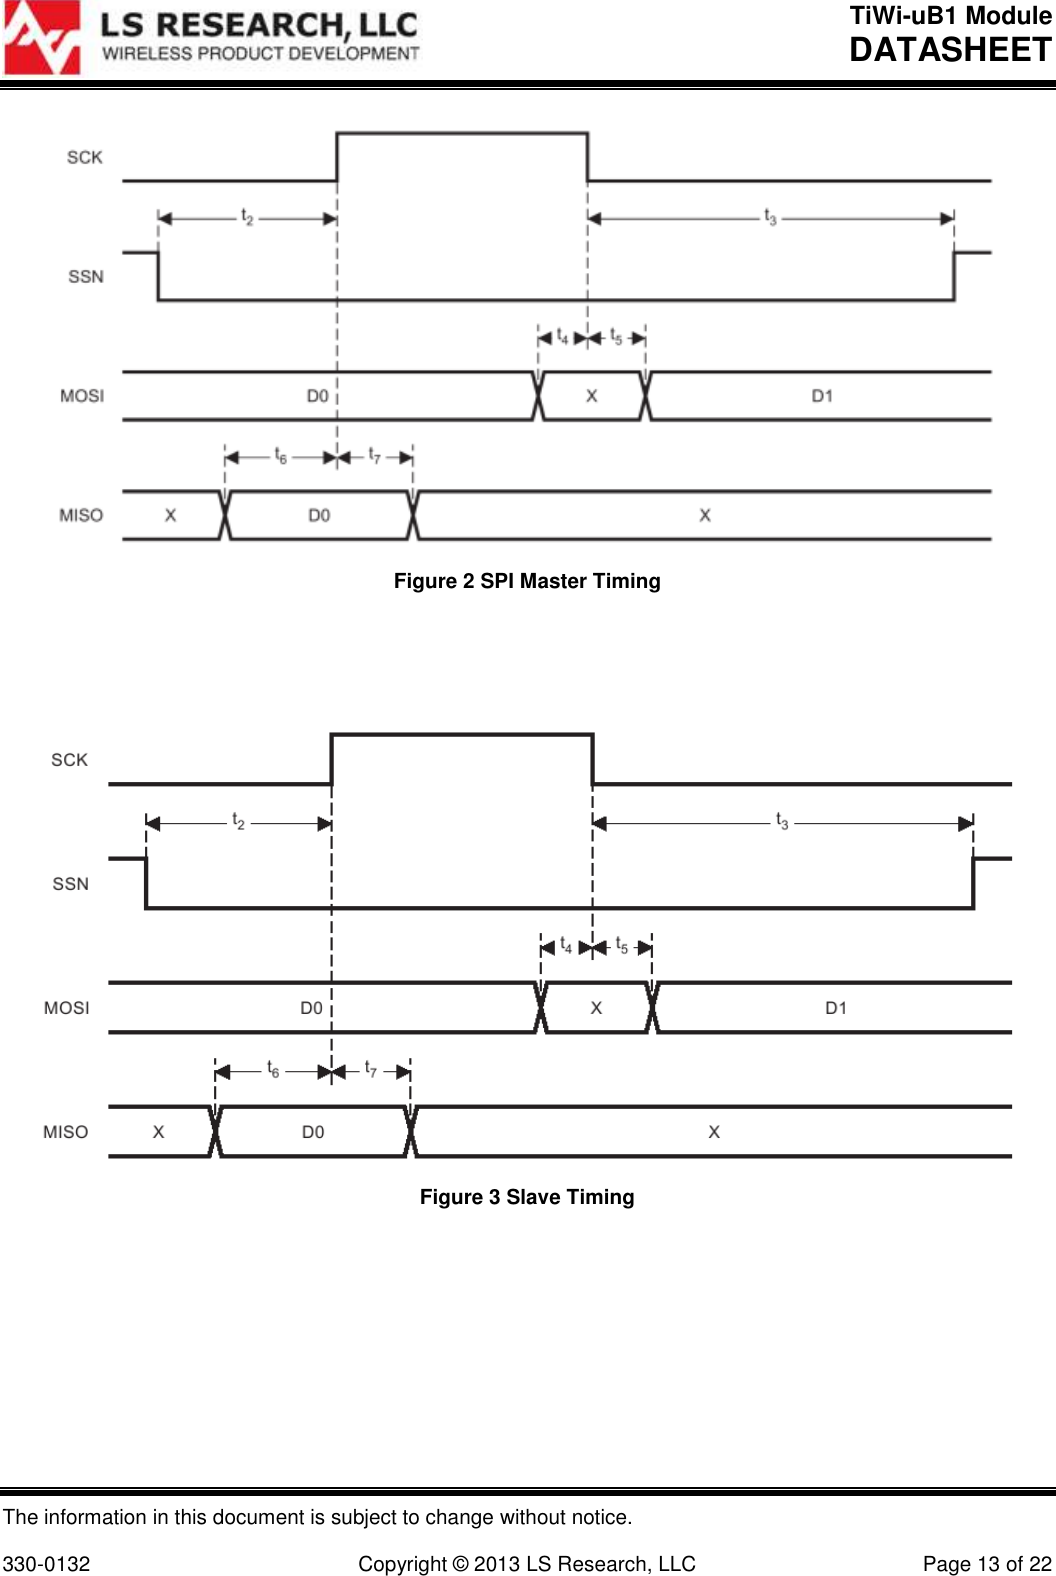 TiWi-uB1 Module DATASHEET  The information in this document is subject to change without notice.  330-0132  Copyright © 2013 LS Research, LLC  Page 13 of 22  Figure 2 SPI Master Timing    Figure 3 Slave Timing    